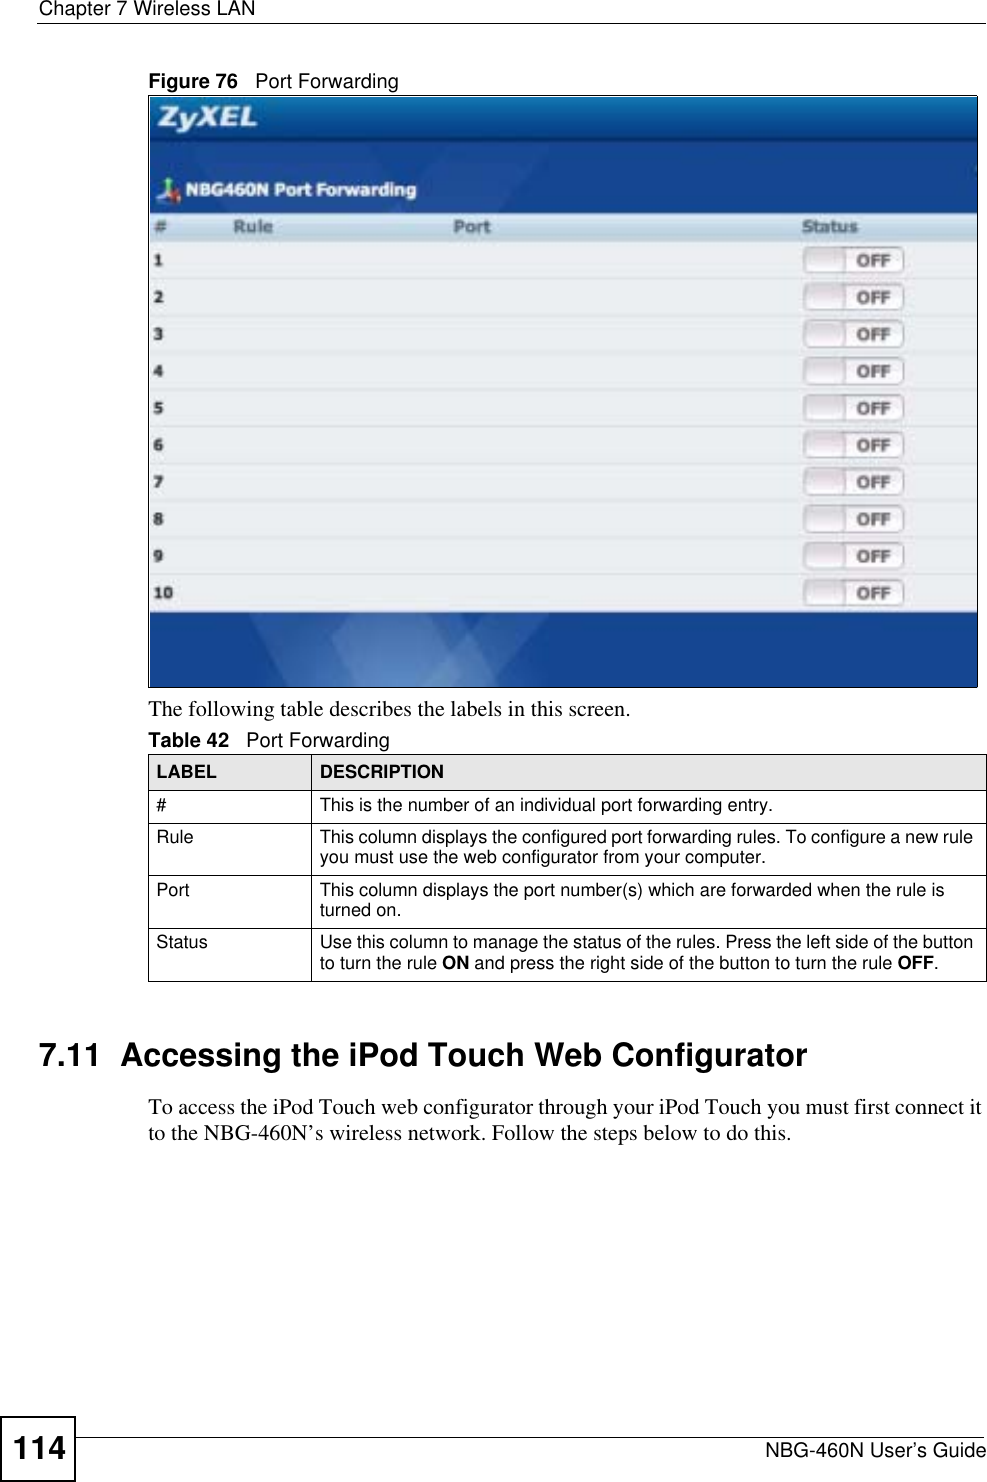 Chapter 7 Wireless LANNBG-460N User’s Guide114Figure 76   Port ForwardingThe following table describes the labels in this screen.7.11  Accessing the iPod Touch Web ConfiguratorTo access the iPod Touch web configurator through your iPod Touch you must first connect it to the NBG-460N’s wireless network. Follow the steps below to do this.Table 42   Port ForwardingLABEL DESCRIPTION#This is the number of an individual port forwarding entry.Rule This column displays the configured port forwarding rules. To configure a new rule you must use the web configurator from your computer.Port This column displays the port number(s) which are forwarded when the rule is turned on.Status Use this column to manage the status of the rules. Press the left side of the button to turn the rule ON and press the right side of the button to turn the rule OFF.